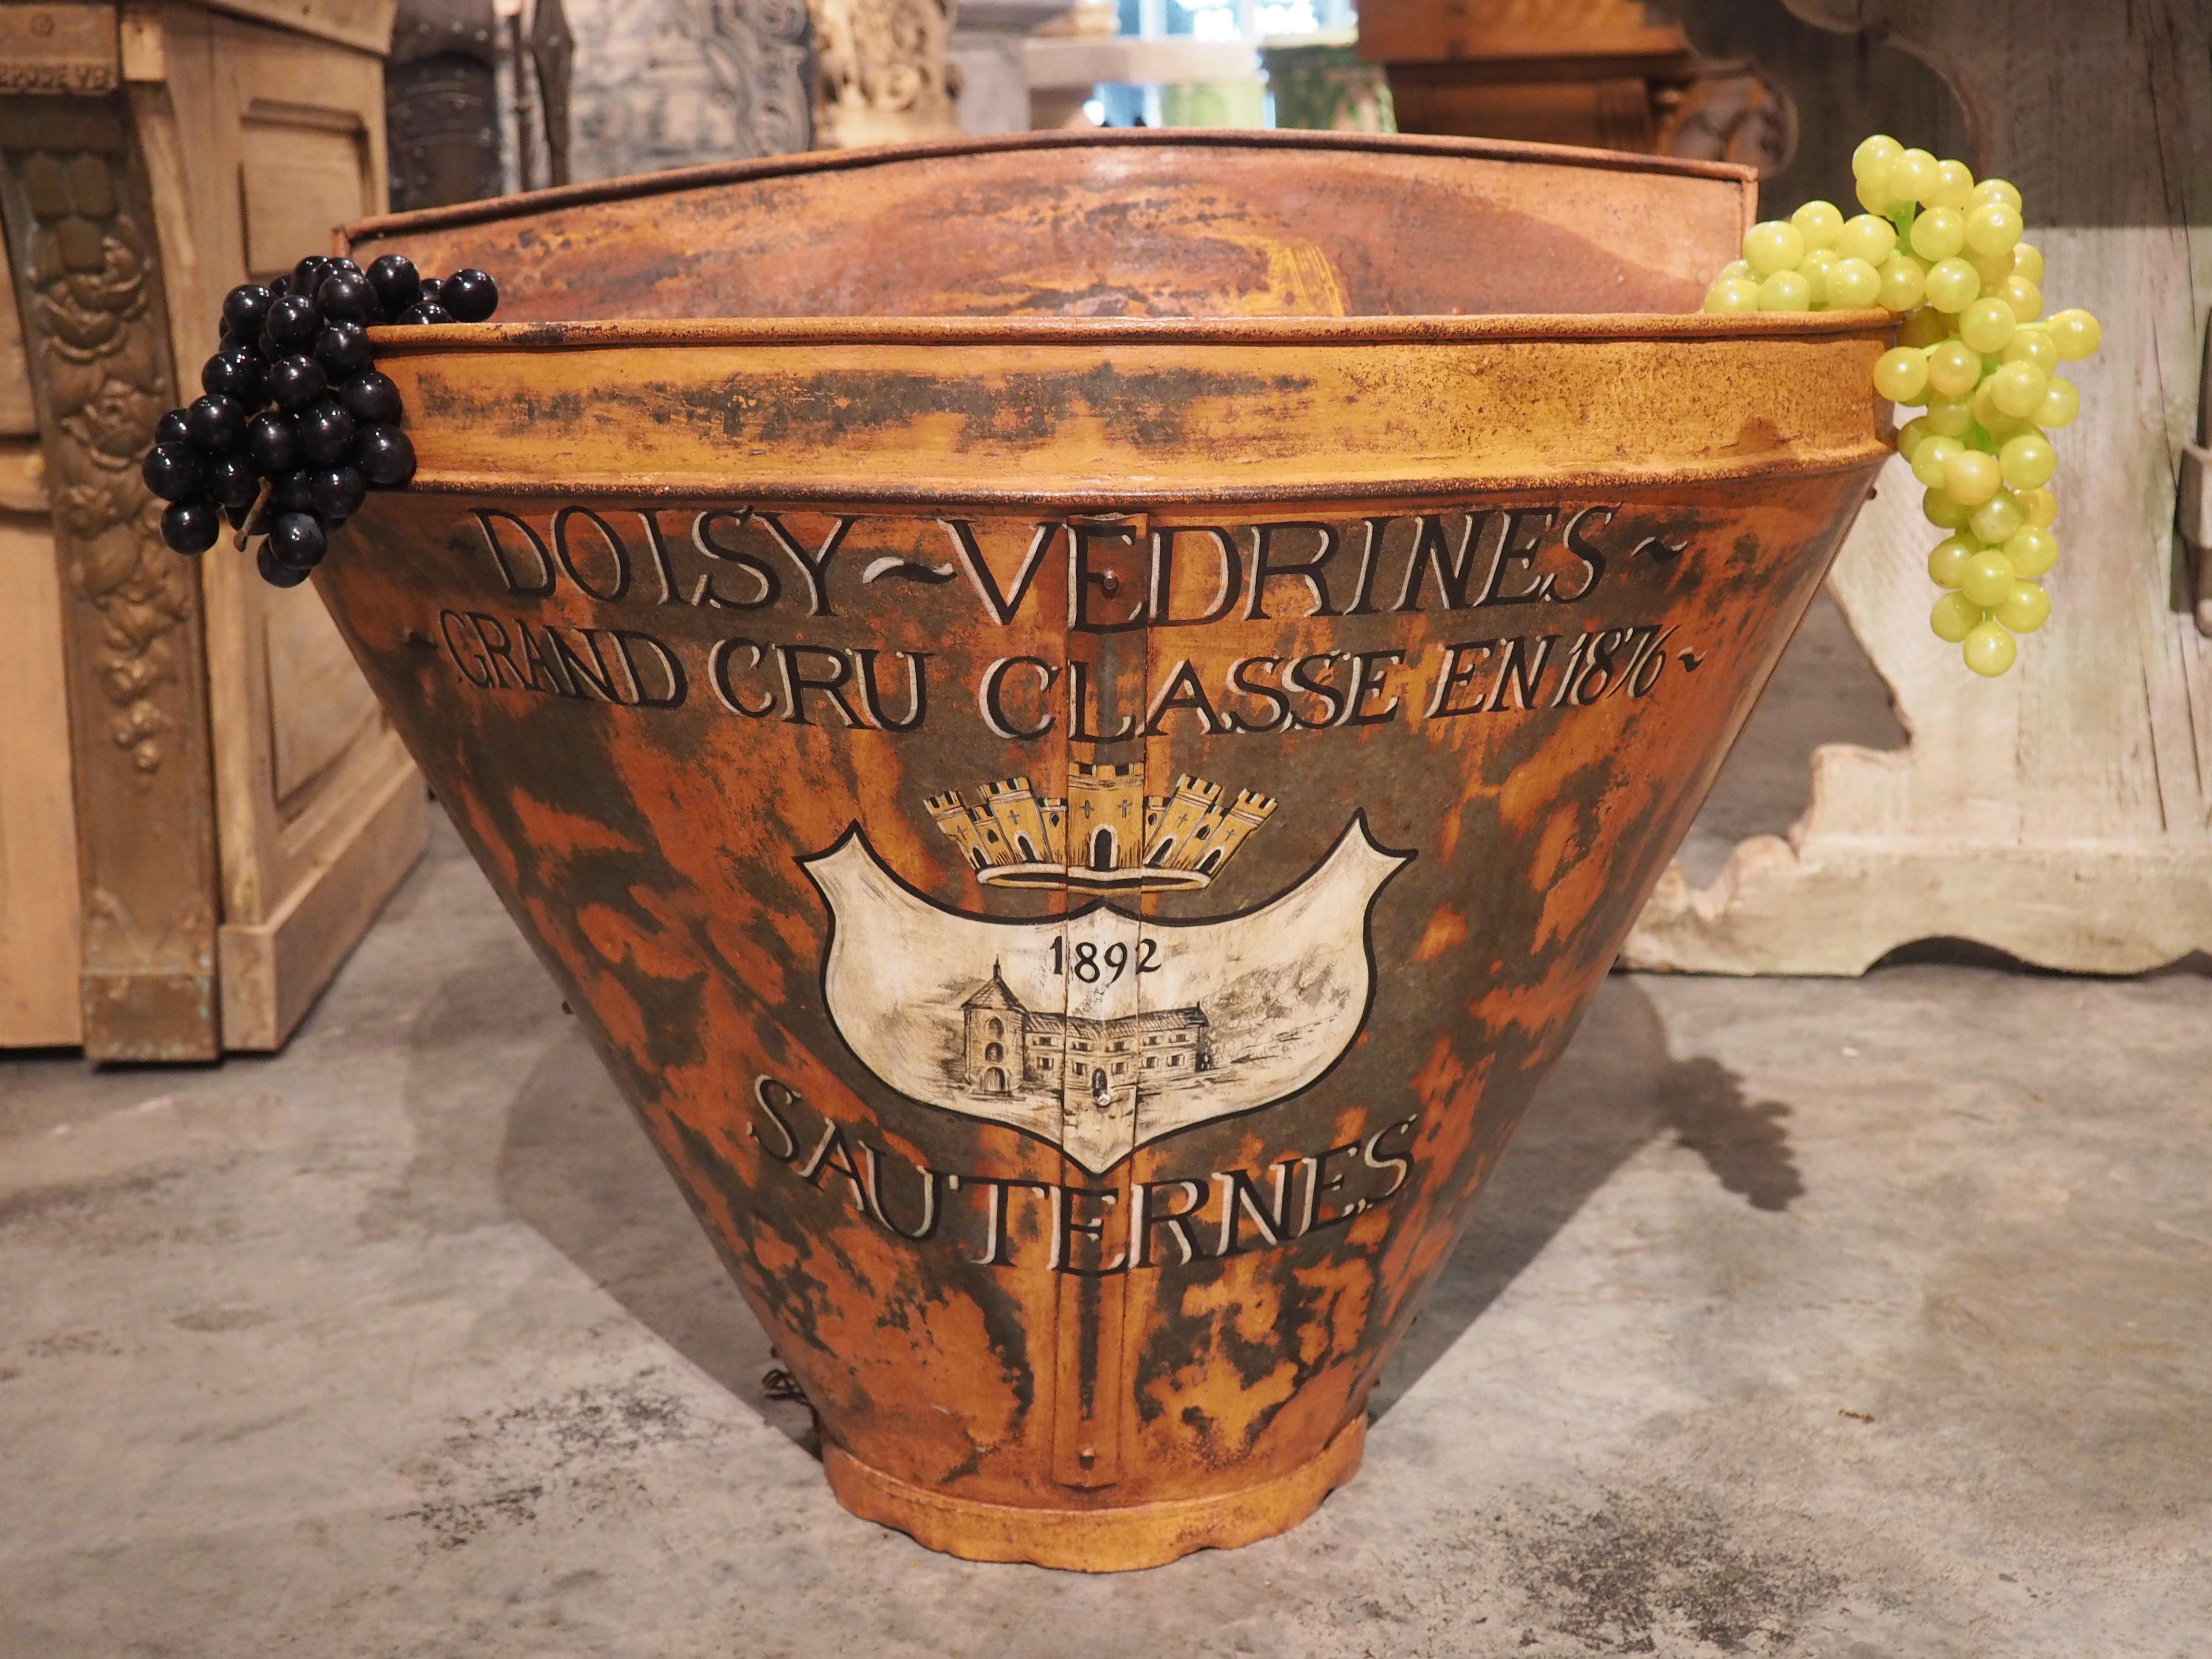 Grape hottes were used at French vineyards during the late 19th and early 20th centuries by workers when harvesting grapes. Our wide-mouthed hotte would have been used in the 1800’s at a vineyard in La Gironde. It has a rolled rim above a second